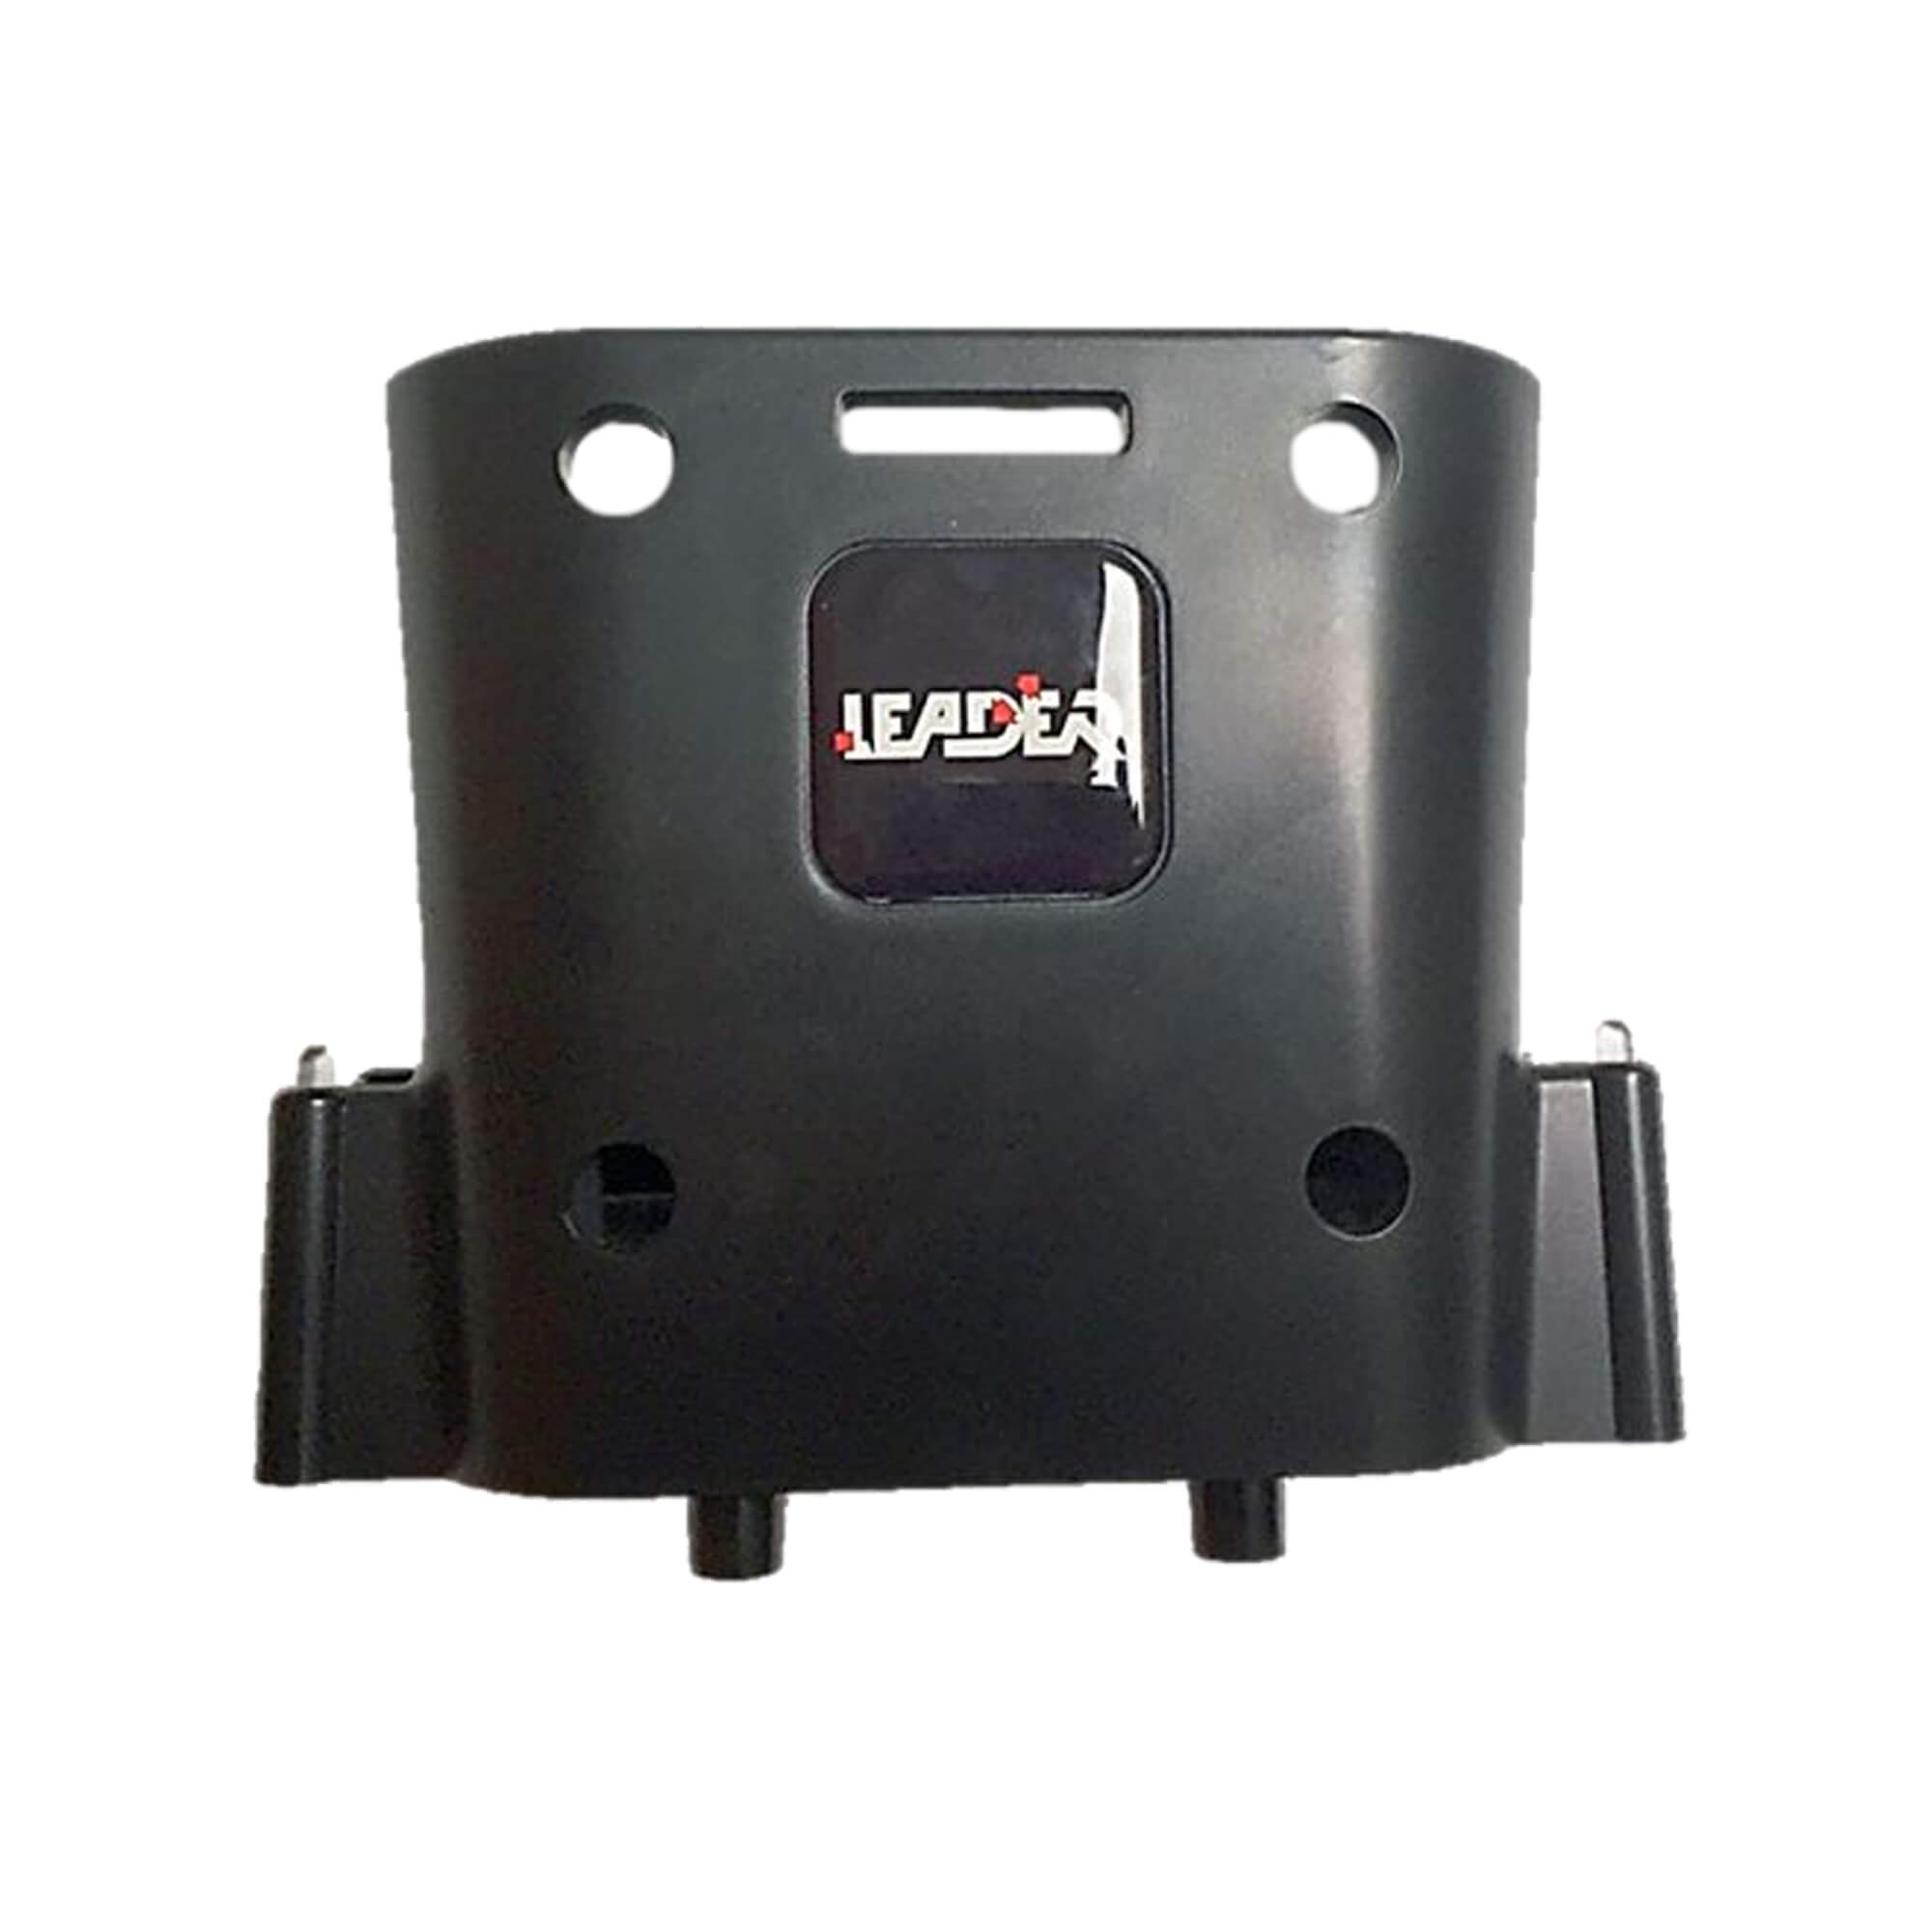 Thermal imaging cameras Charge base for Leader TIC 3.1 / 3.3 / 4.1 / 4.3